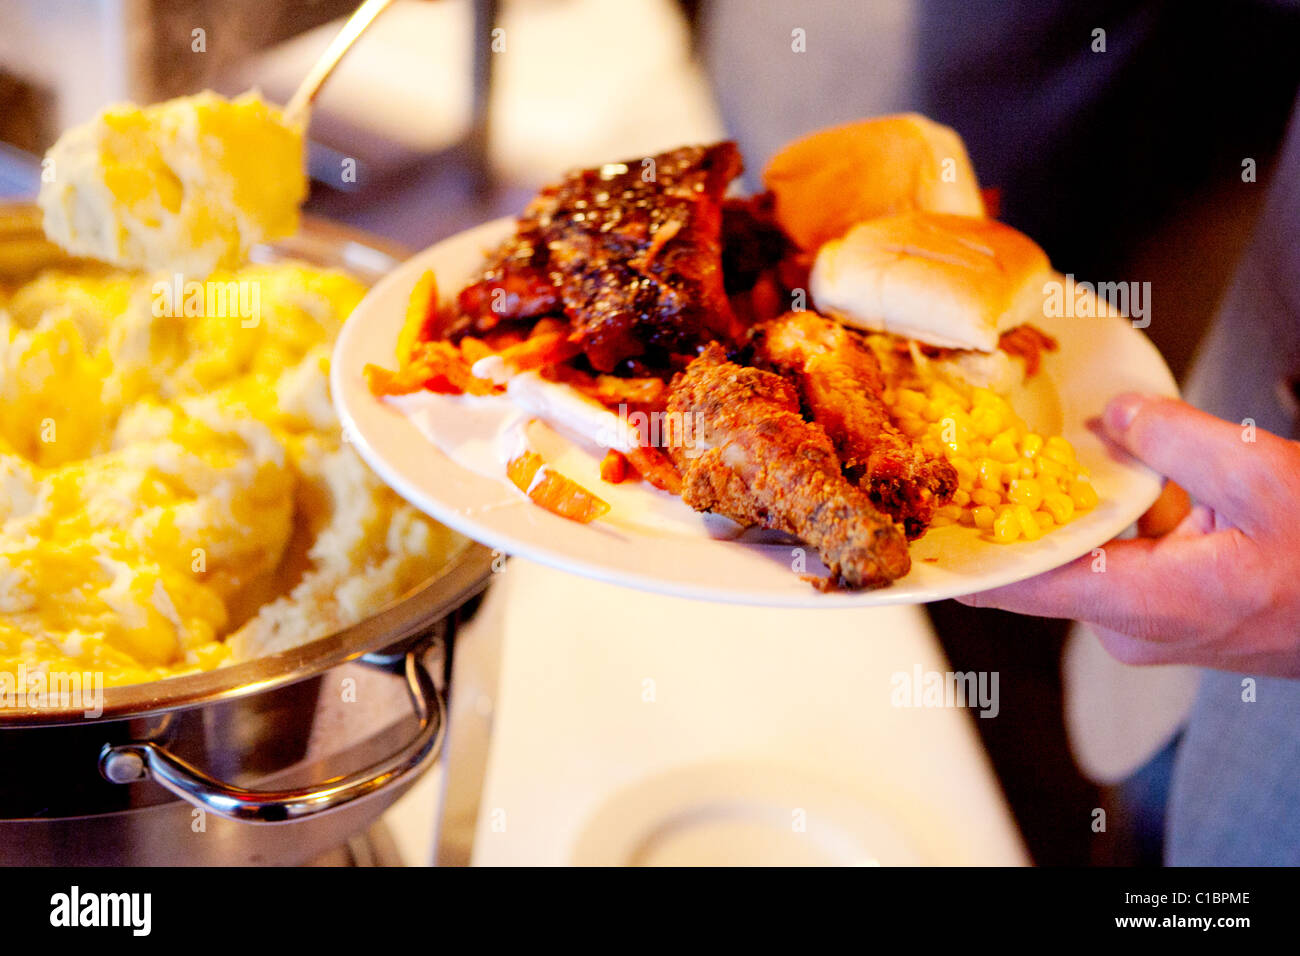 SOUTHERN FOOD FARE PLATE GRITTS CORN CORNBREAD WINGS BARBECUE SOUTH AMERICAN AMERICA FOODS MEAL US USA CULINARY Stock Photo